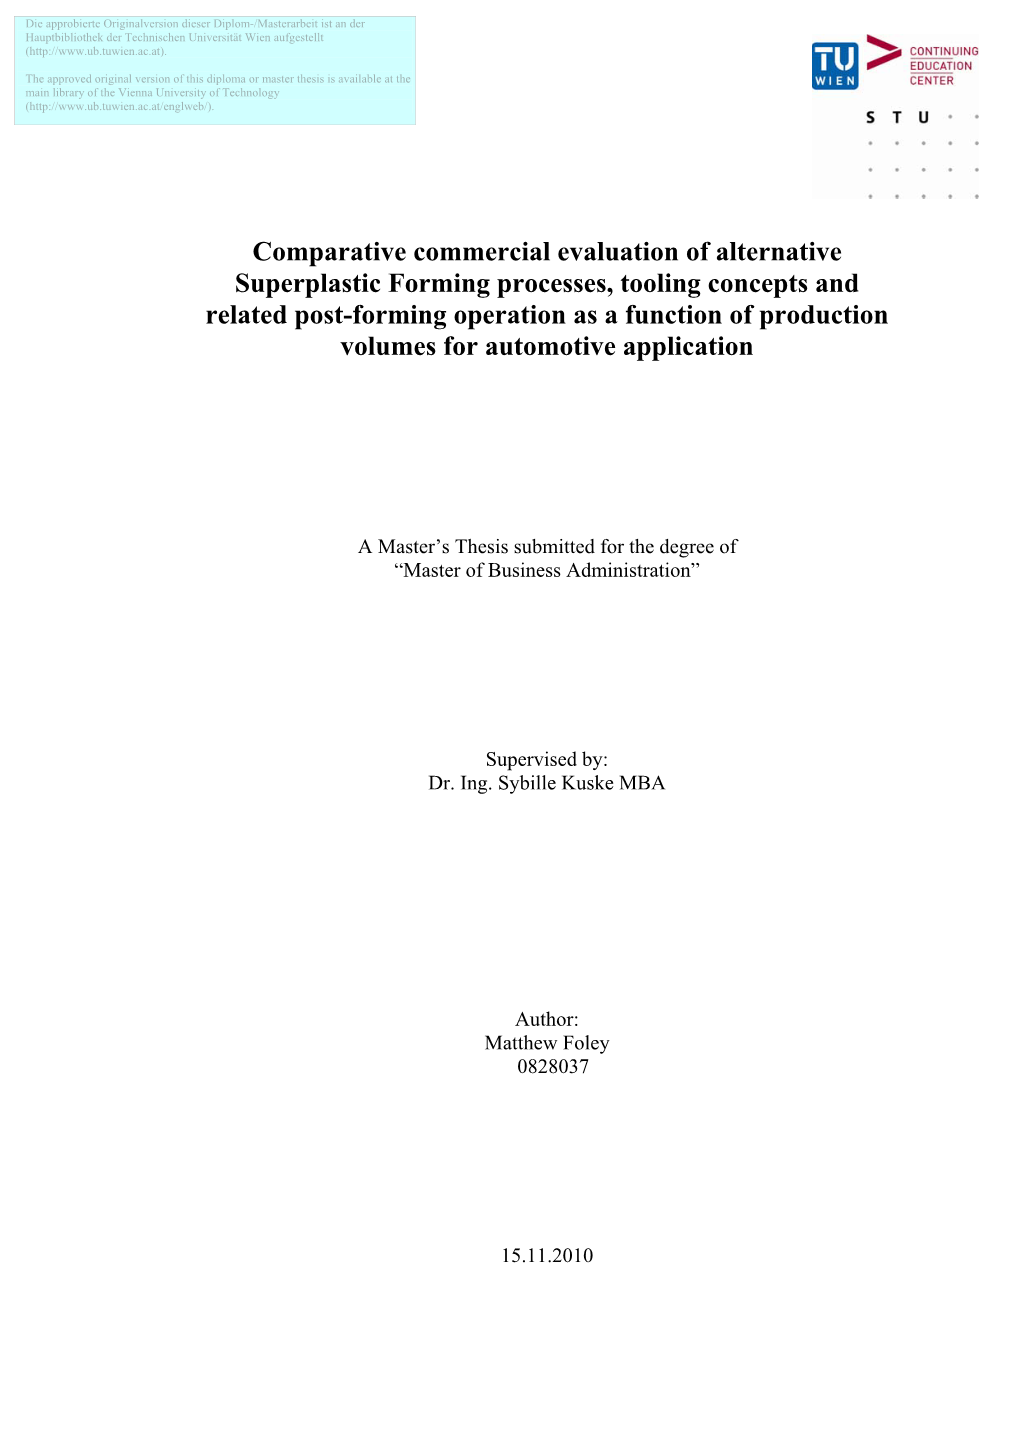 Comparative Commercial Evaluation of Alternative Superplastic Forming Processes, Tooling Concepts and Related Post-Forming Opera